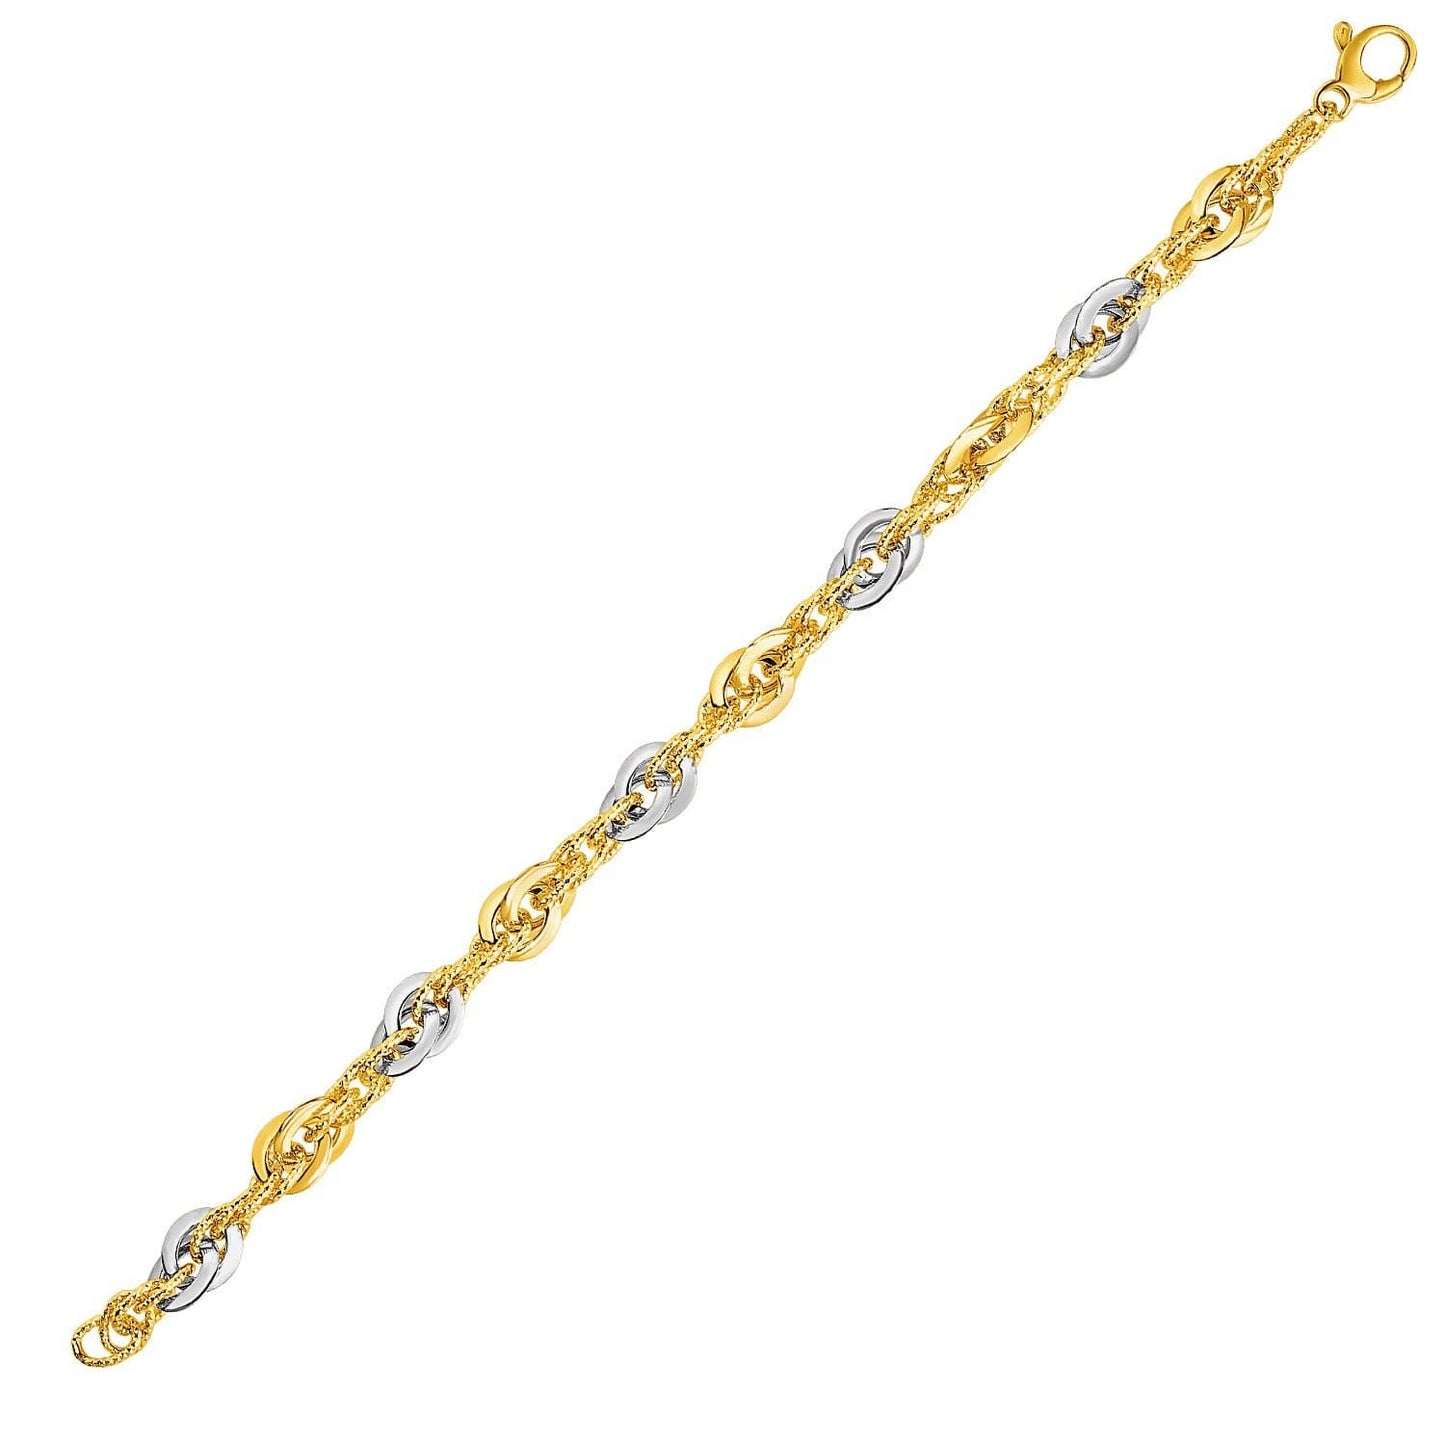 14k Two-Tone Yellow and White Gold Double Link Textured Bracelet